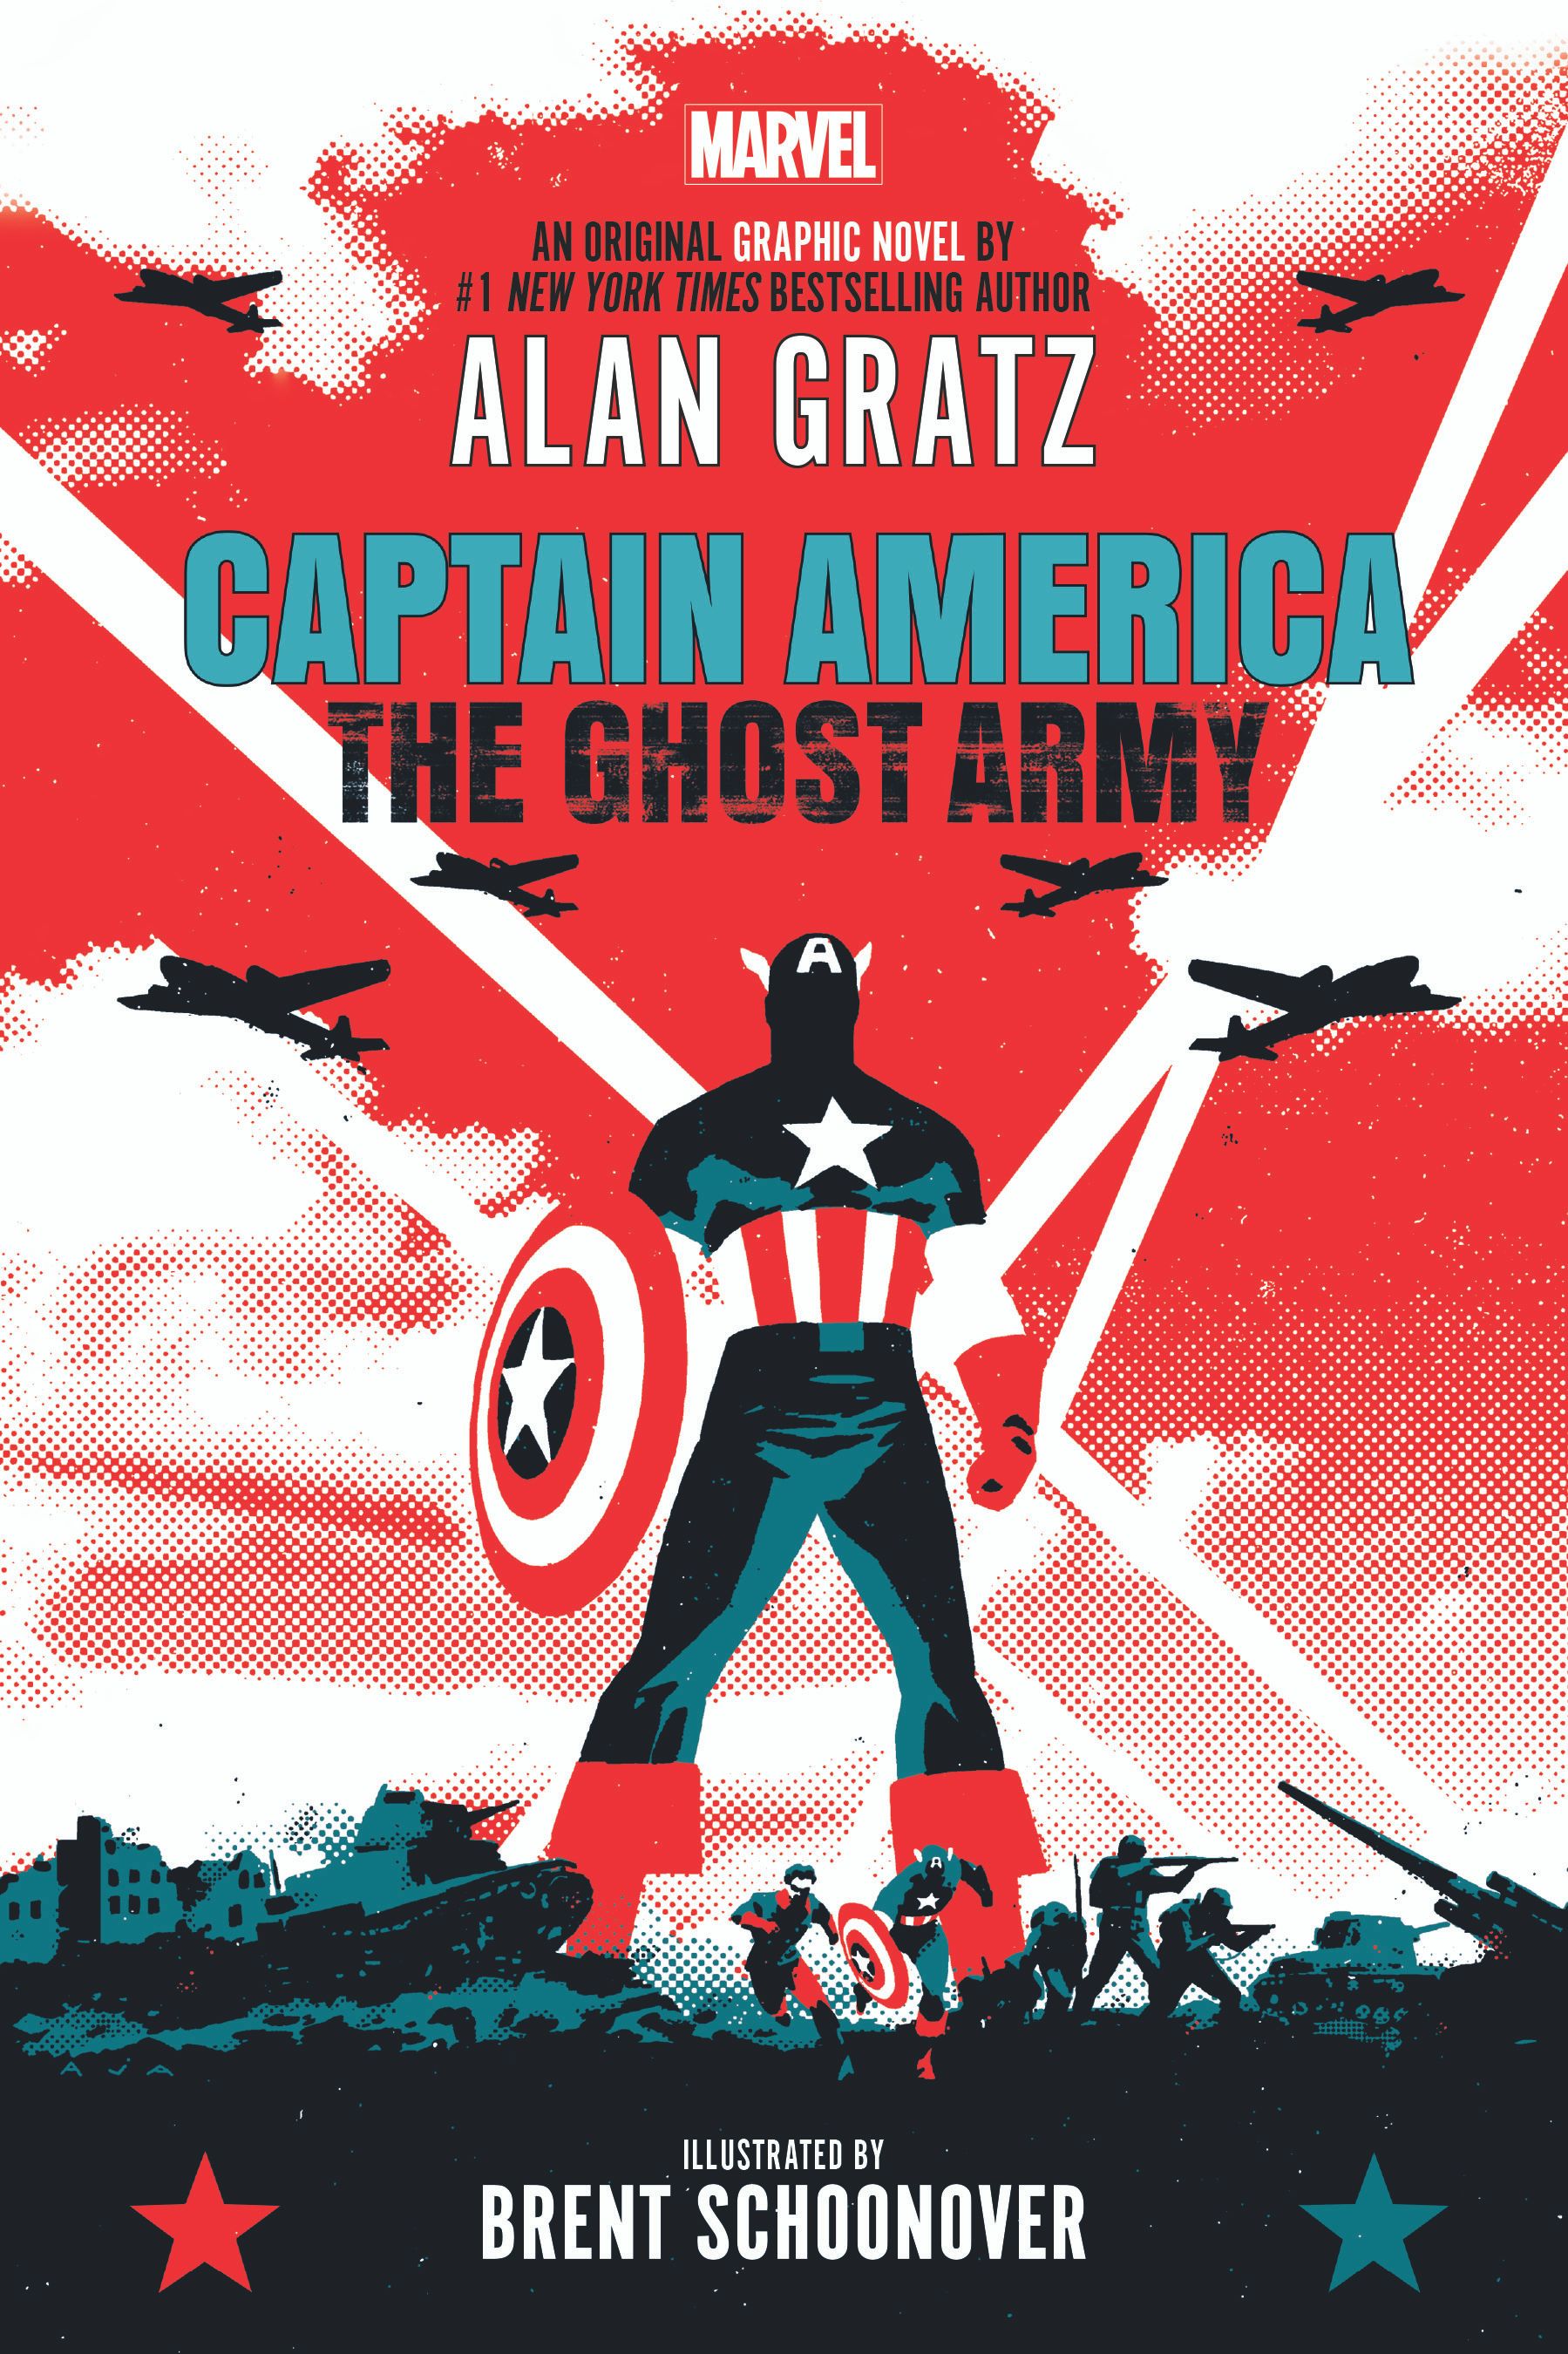 Captain America: The Ghost Army graphic novel cover